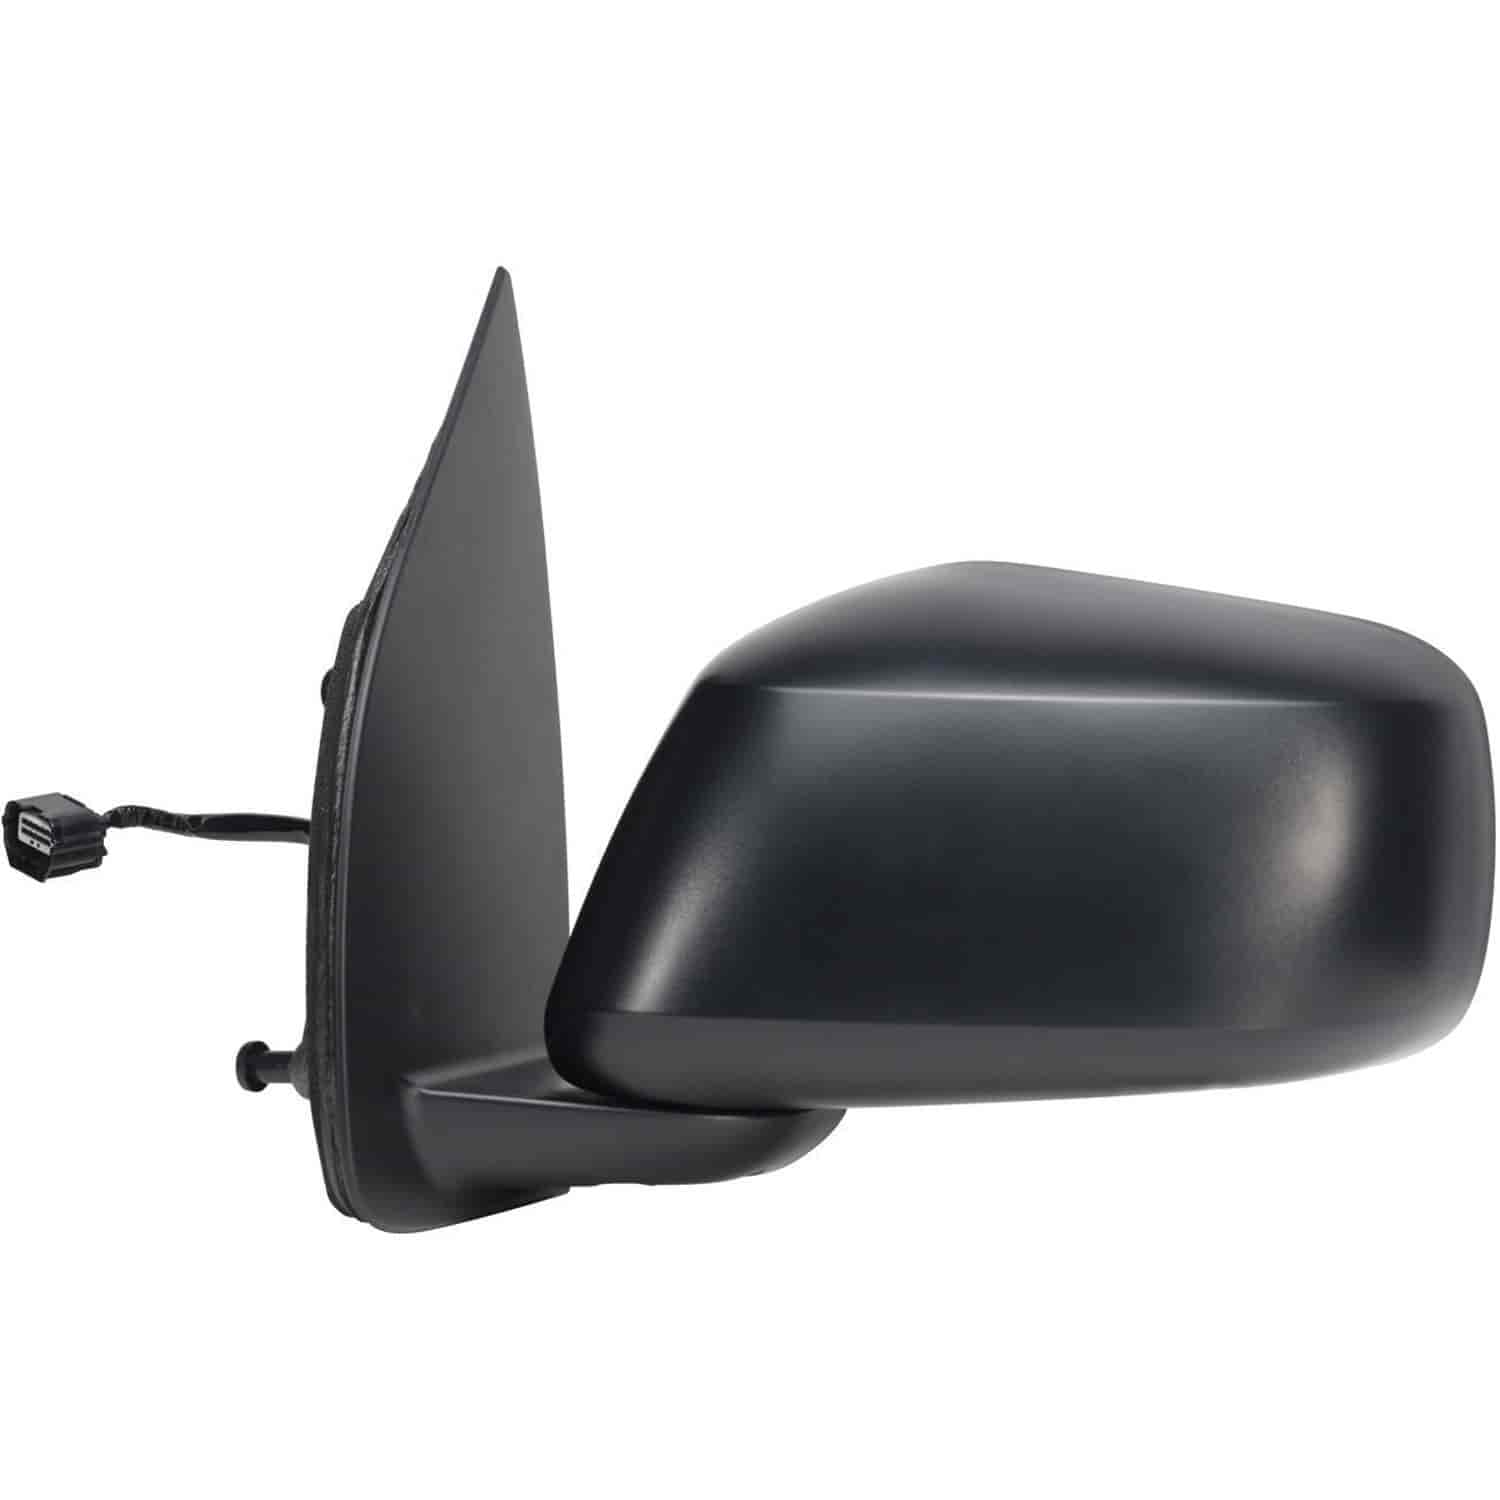 OEM Style Replacement mirror for 05-14 Nissan Frontier extended/crewcab driver side mirror tested to